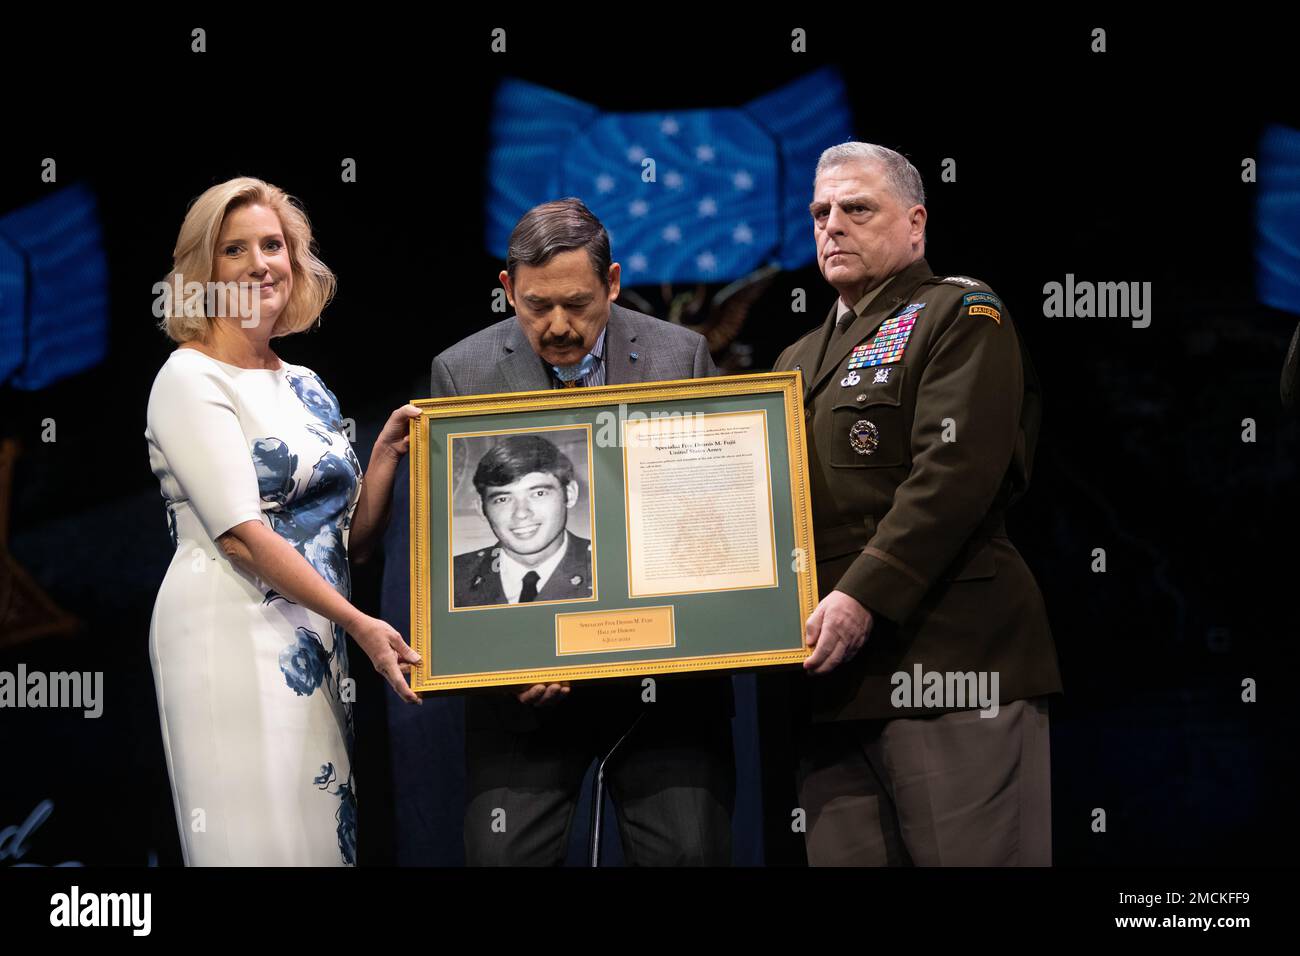 Secretary of the Army Christine Wormuth presents a photo and citation to Medal of Honor recipient former Army Spc. Five Dennis M. Fujii, in a ceremony in which Fujii and five other Medal of Honor recipients were inducted into the Pentagon Hall of Heroes, at Joint Base Myer-Henderson Hall, Va., July 6, 2022. (DoD photo by Lisa Ferdinando) Stock Photo